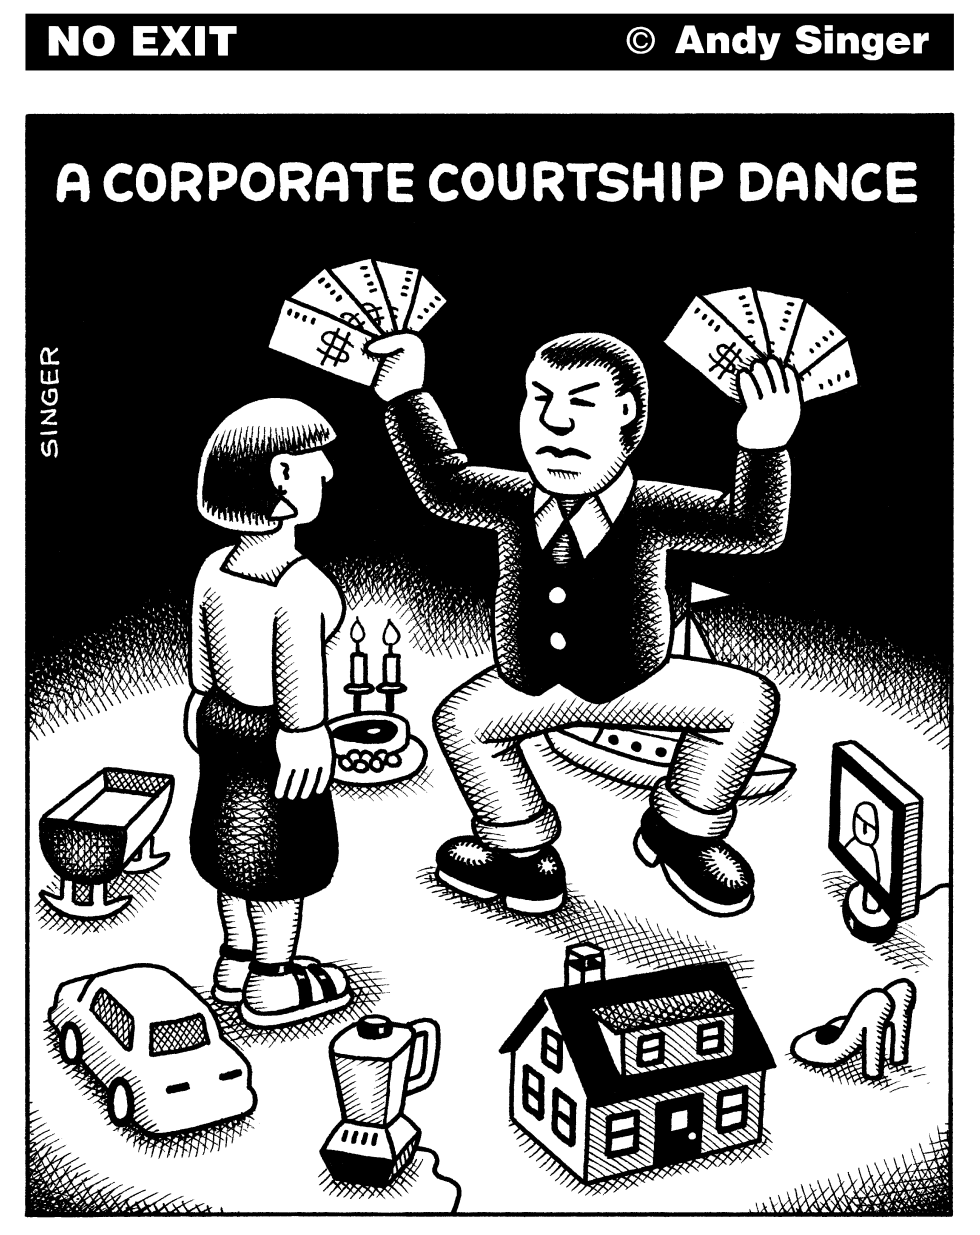  CORPORATE COURTSHIP DANCE by Andy Singer